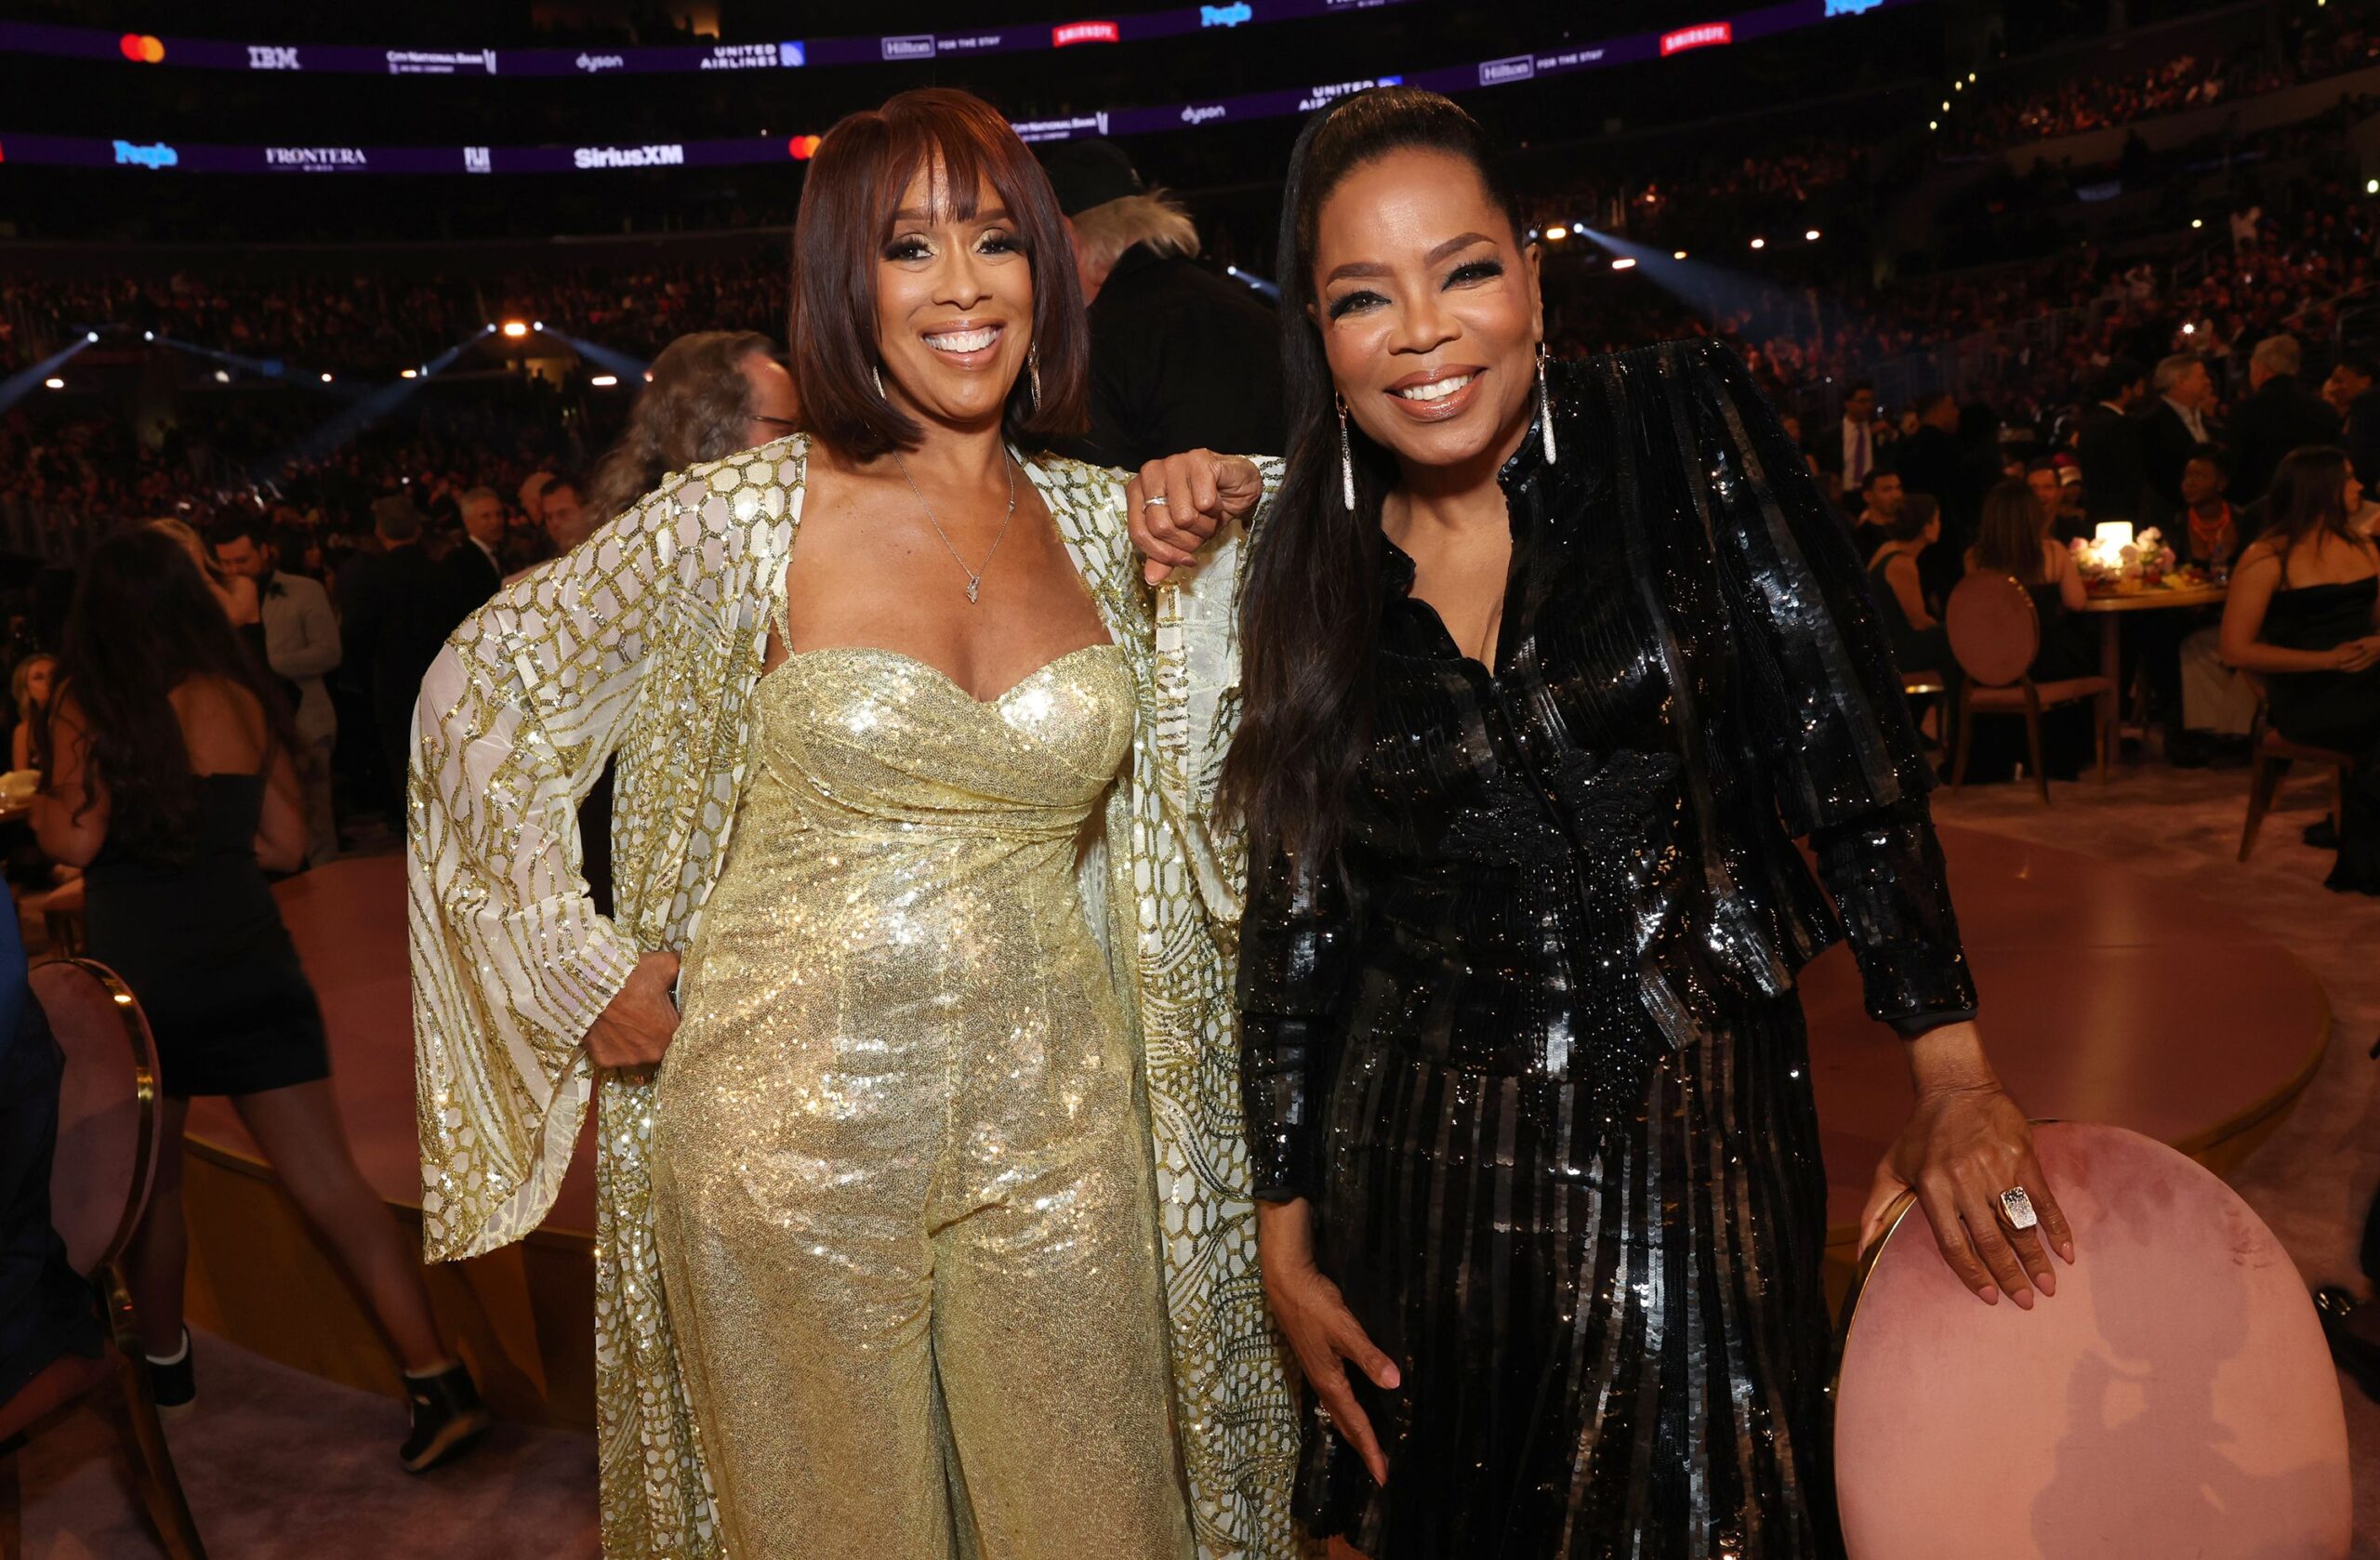 Oprah talks shots. Not weight loss ones, but tequila that Gayle King refuses - Entertainment - News